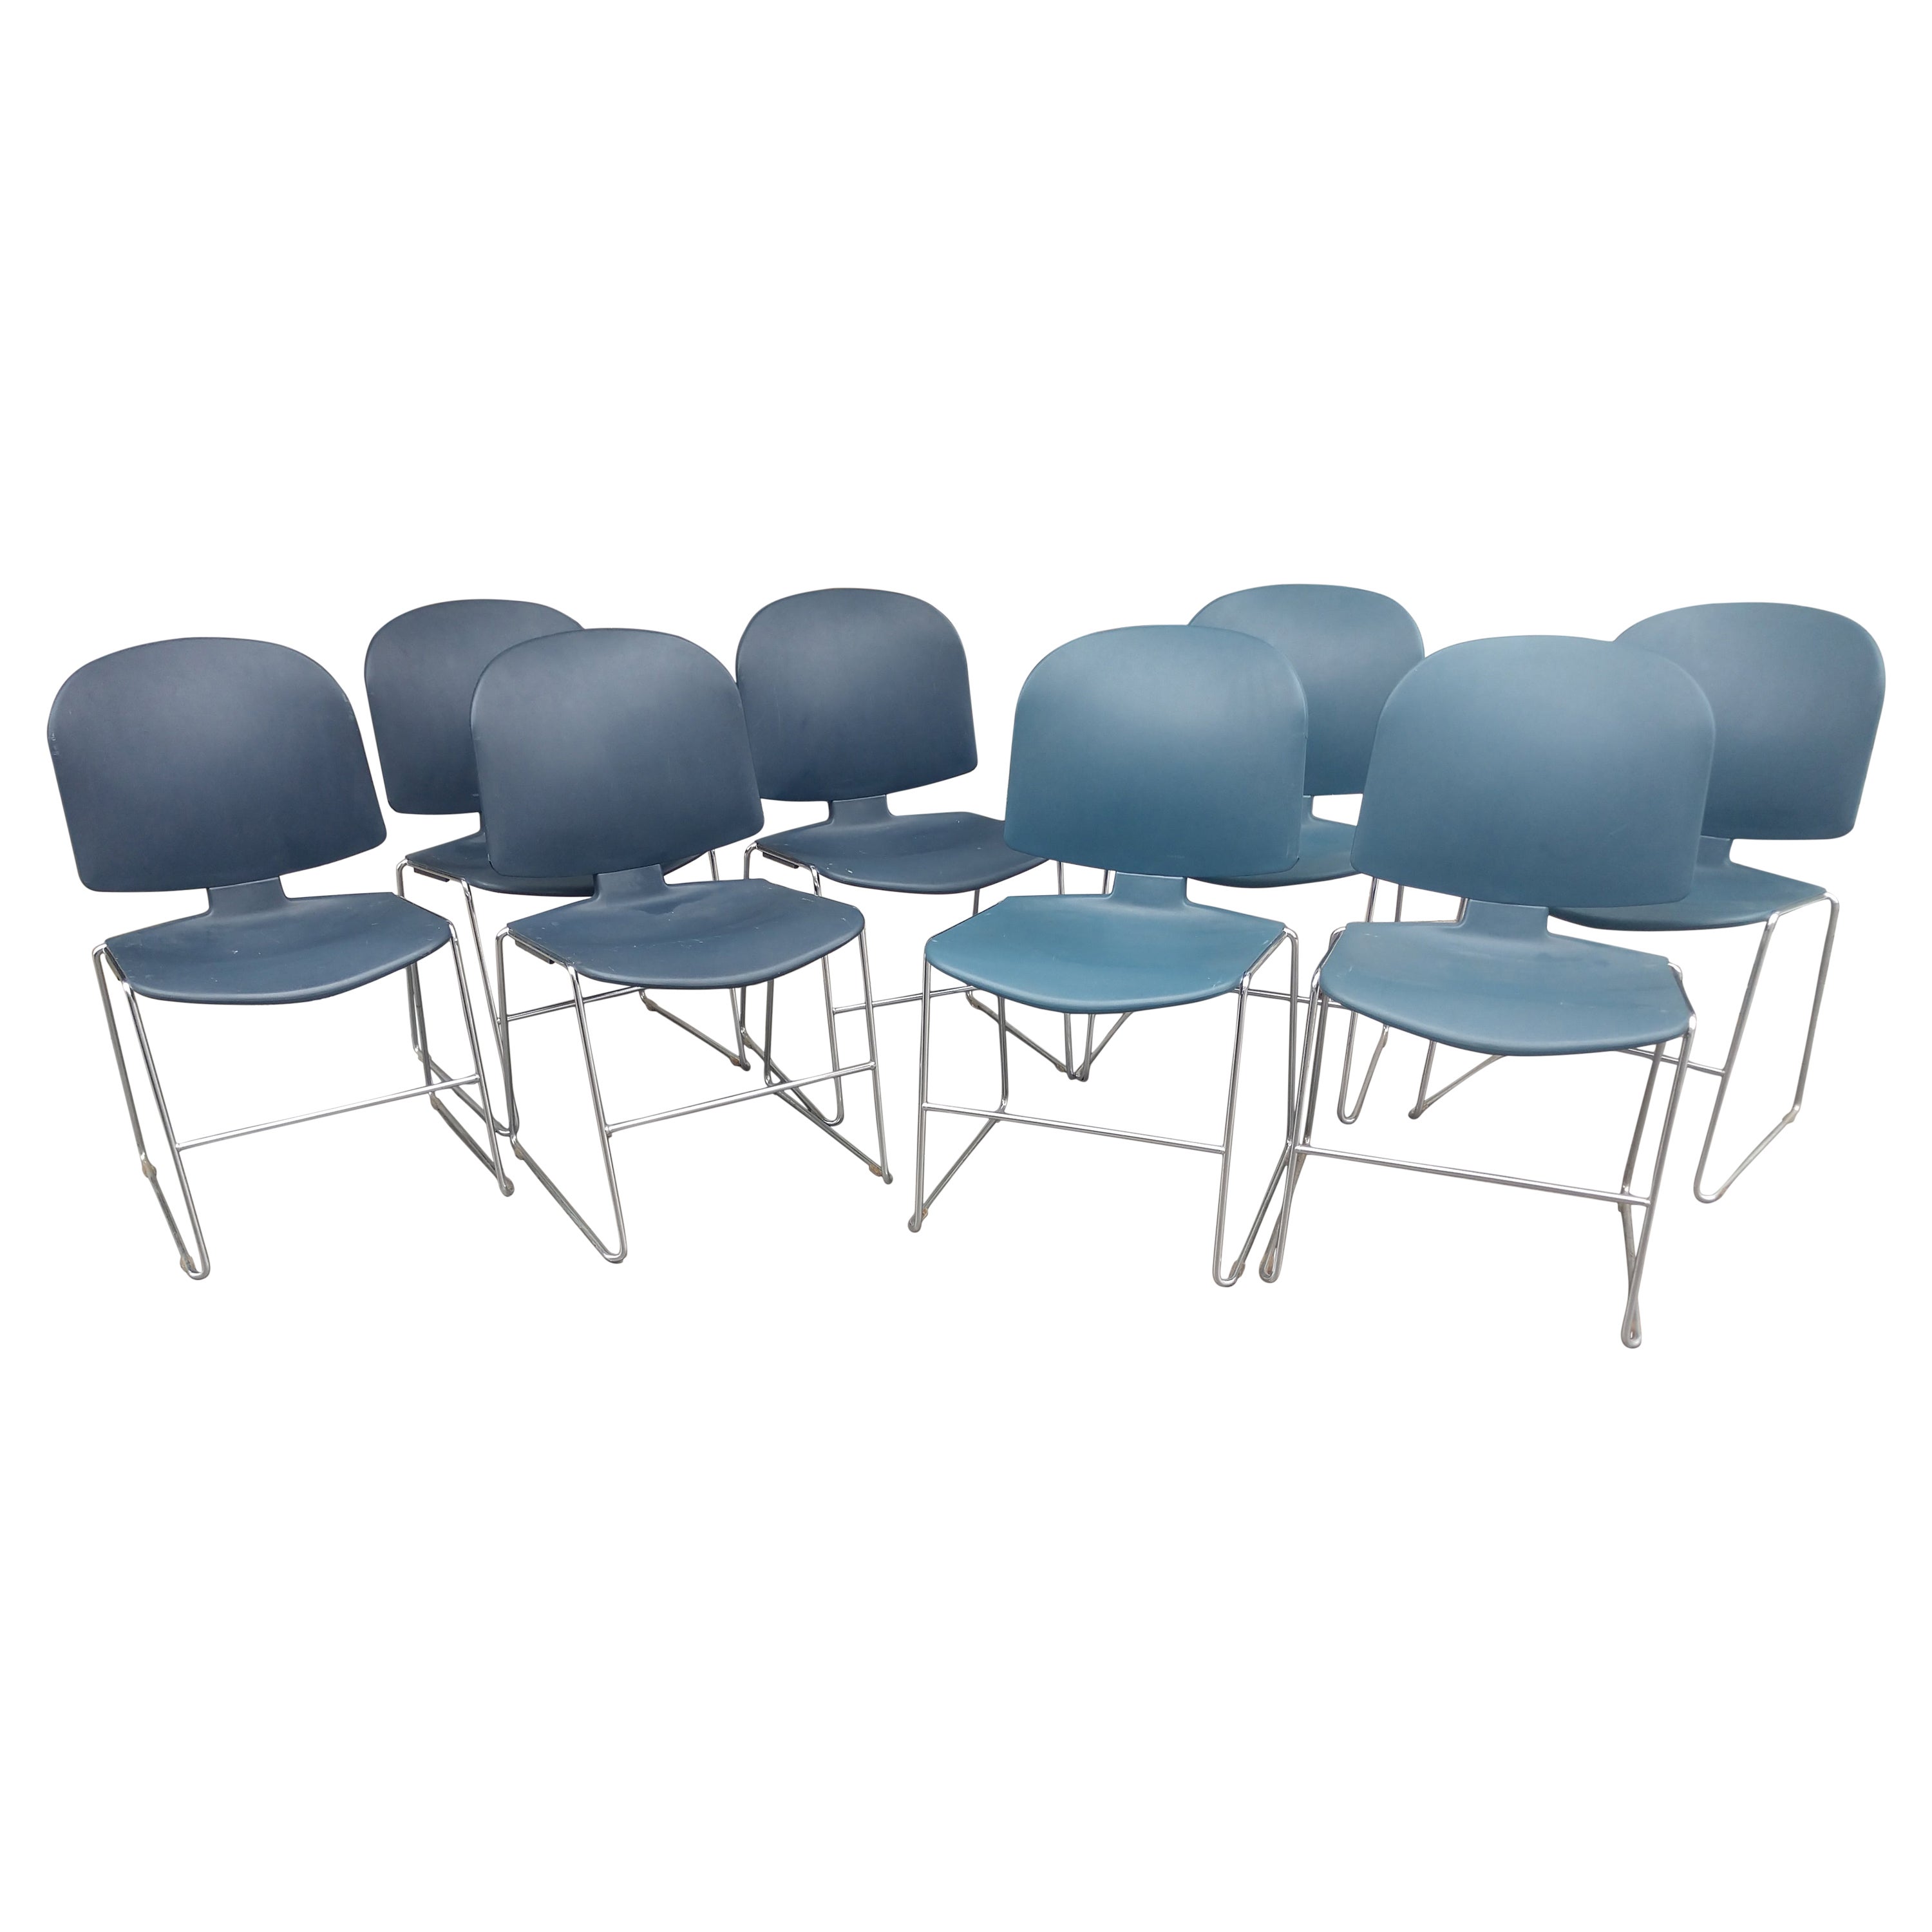 14 Steelcase Mid Century Modern Stacking Chairs